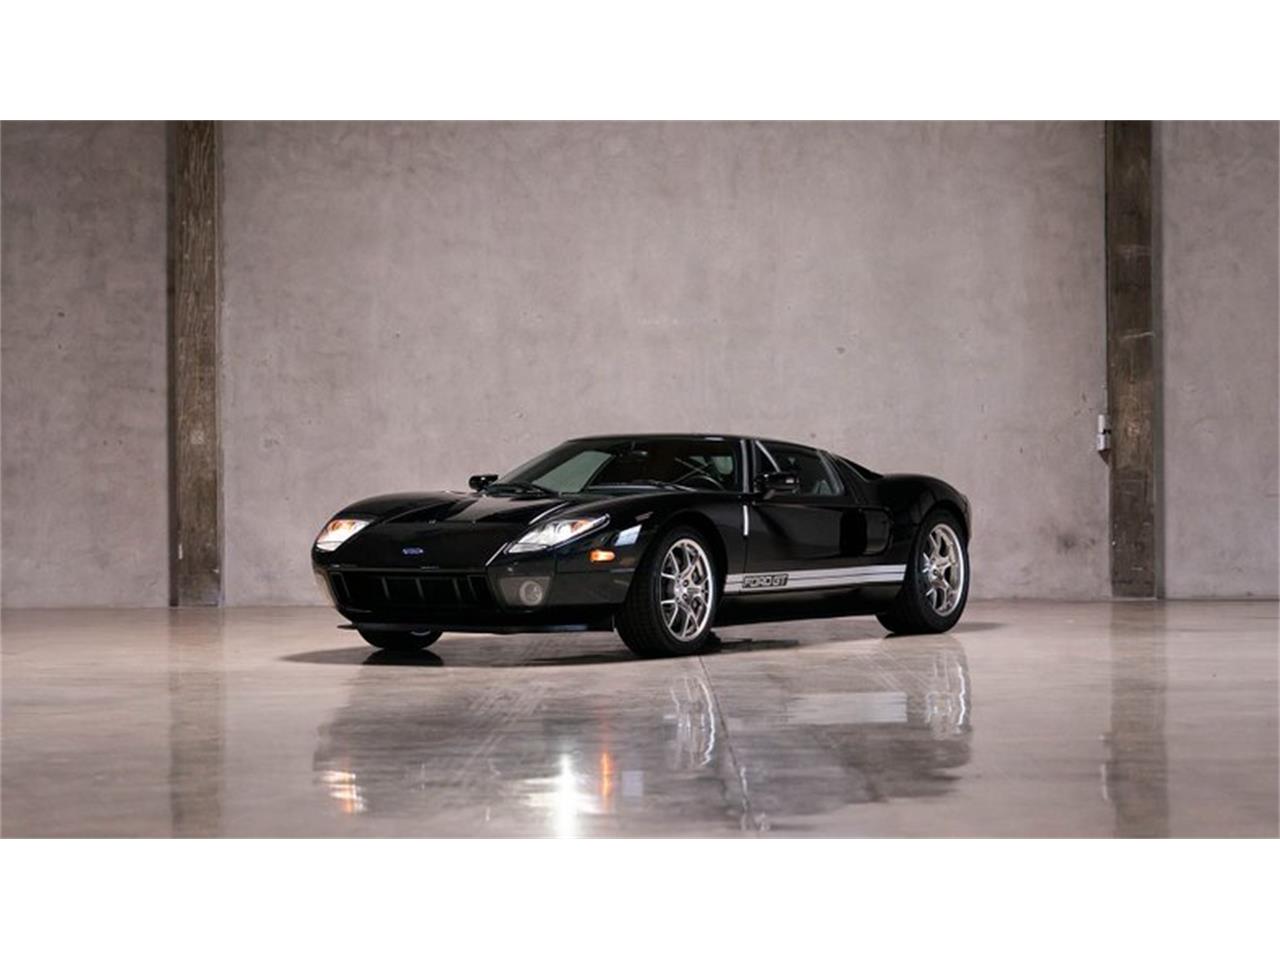 For Sale at Auction: 2005 Ford GT in Monterey, California for sale in Monterey, CA